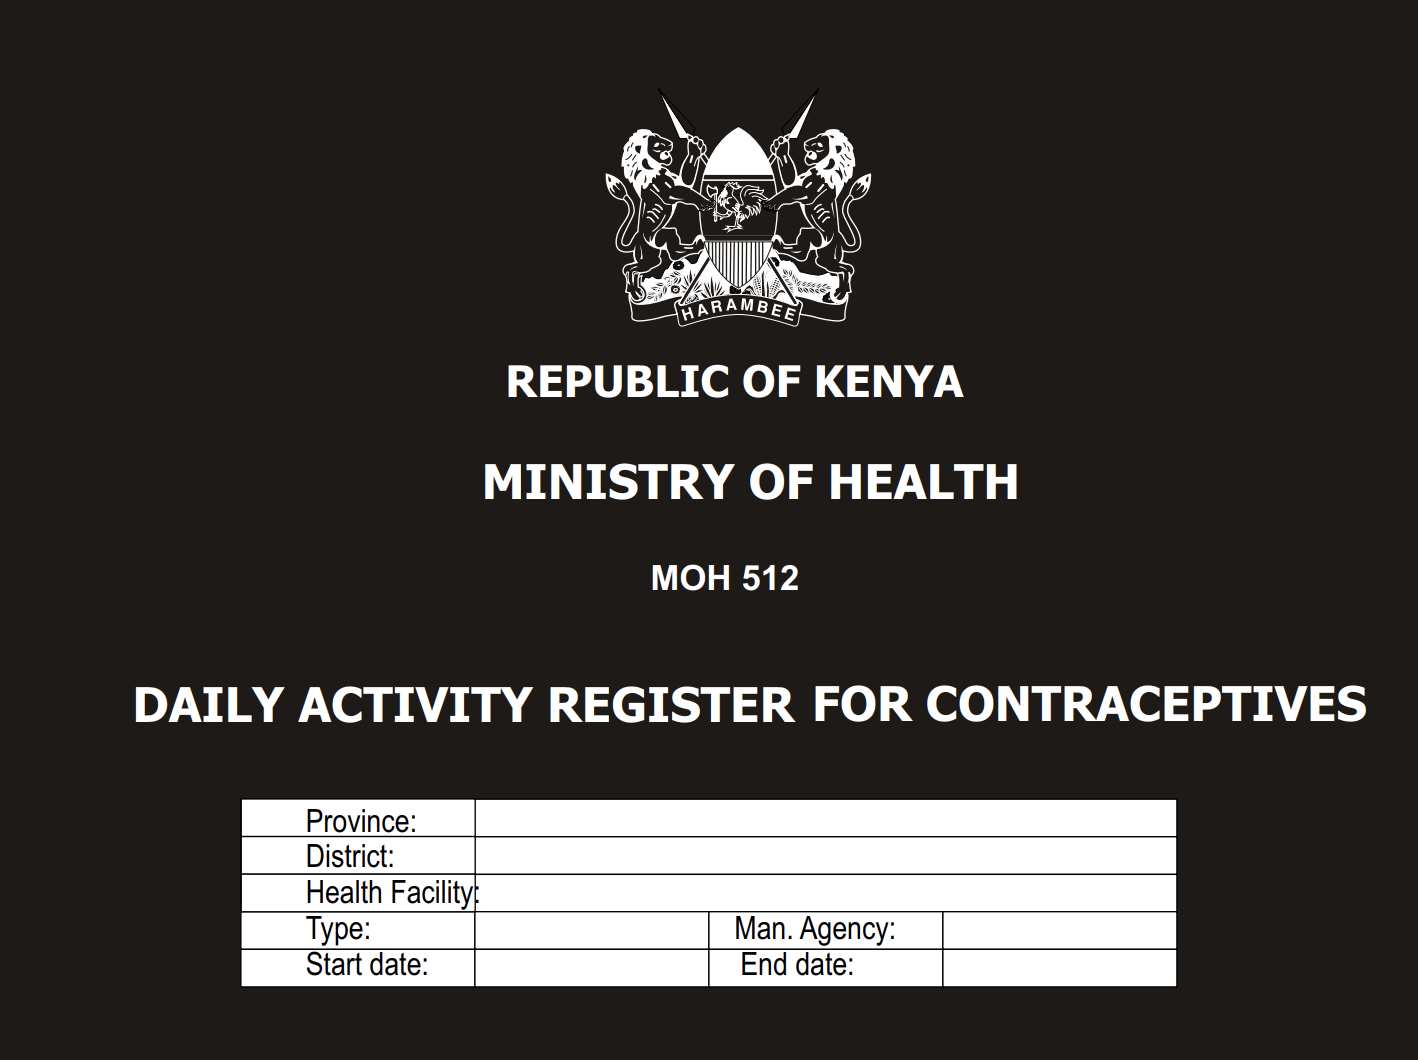 Daily Activity Register for Contraceptives